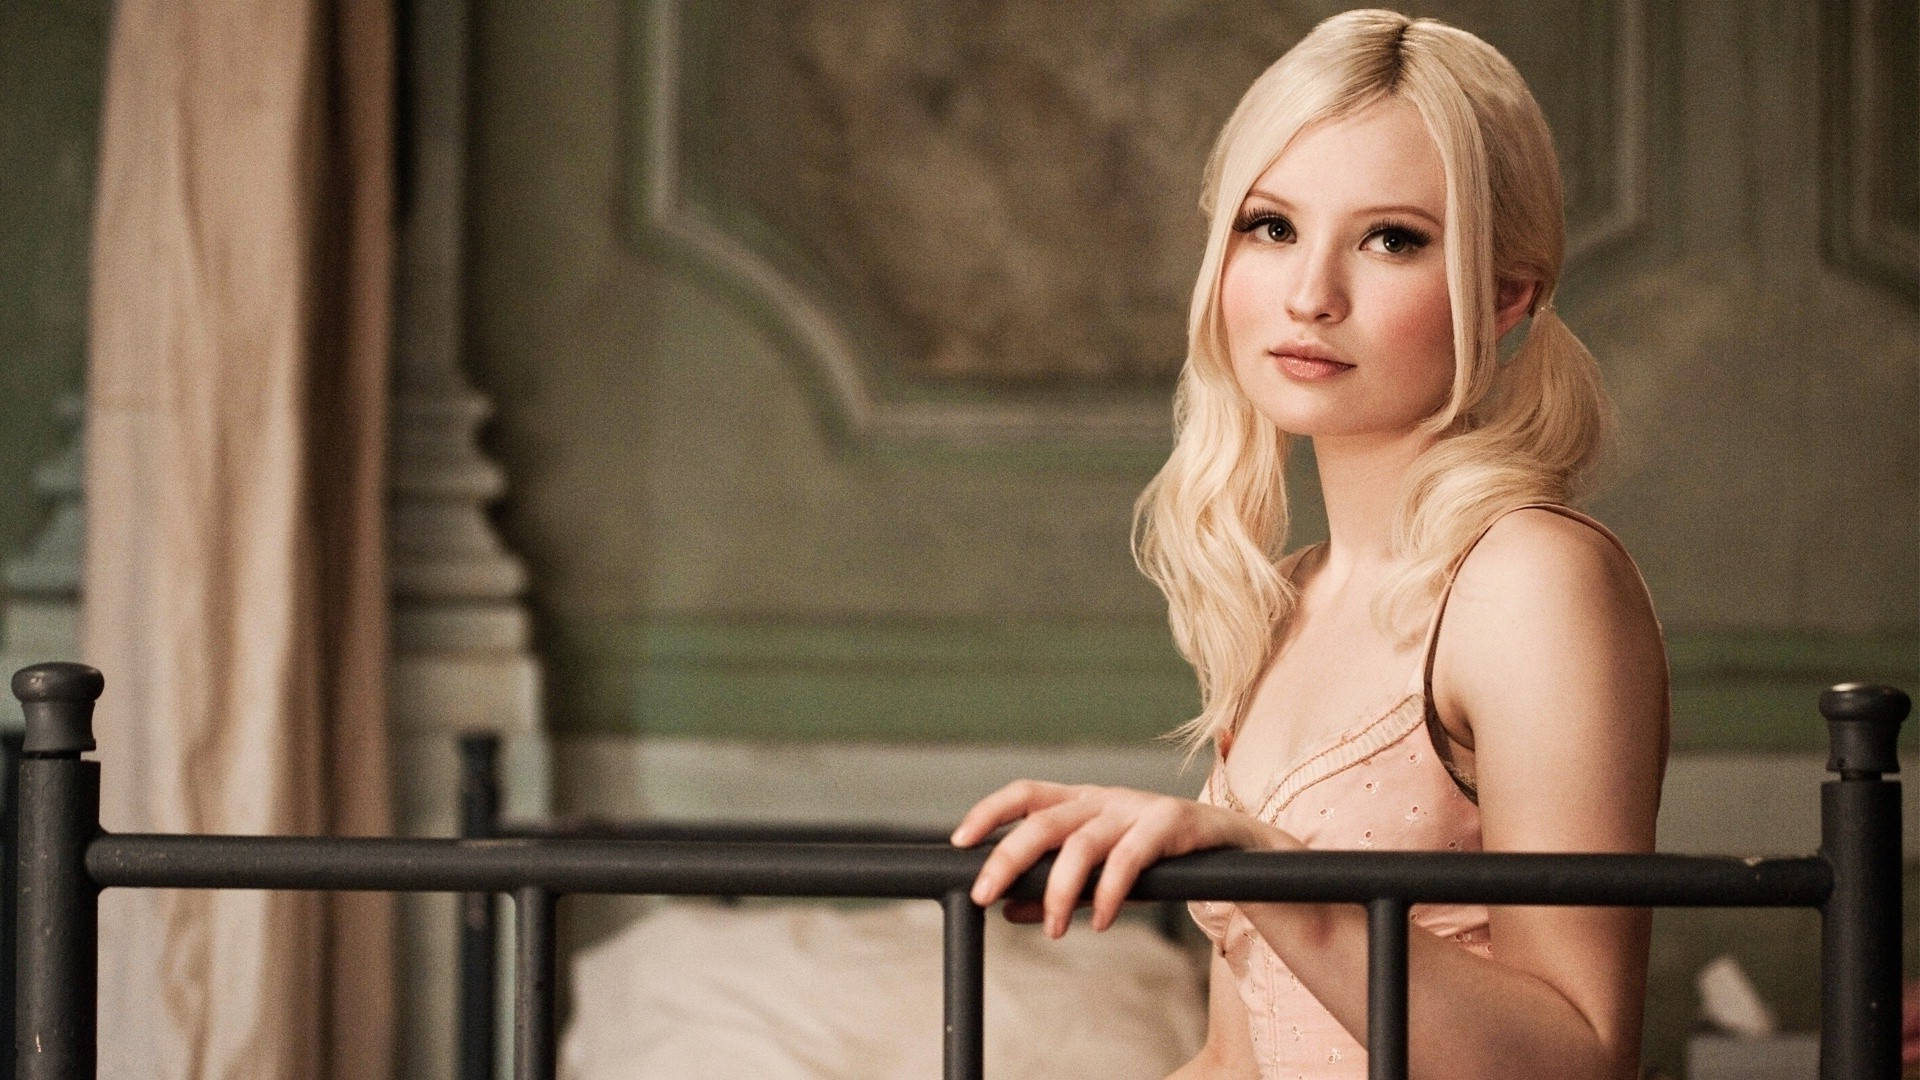 Emilybrowning Come Baby Doll In Sucker Punch Sfondo